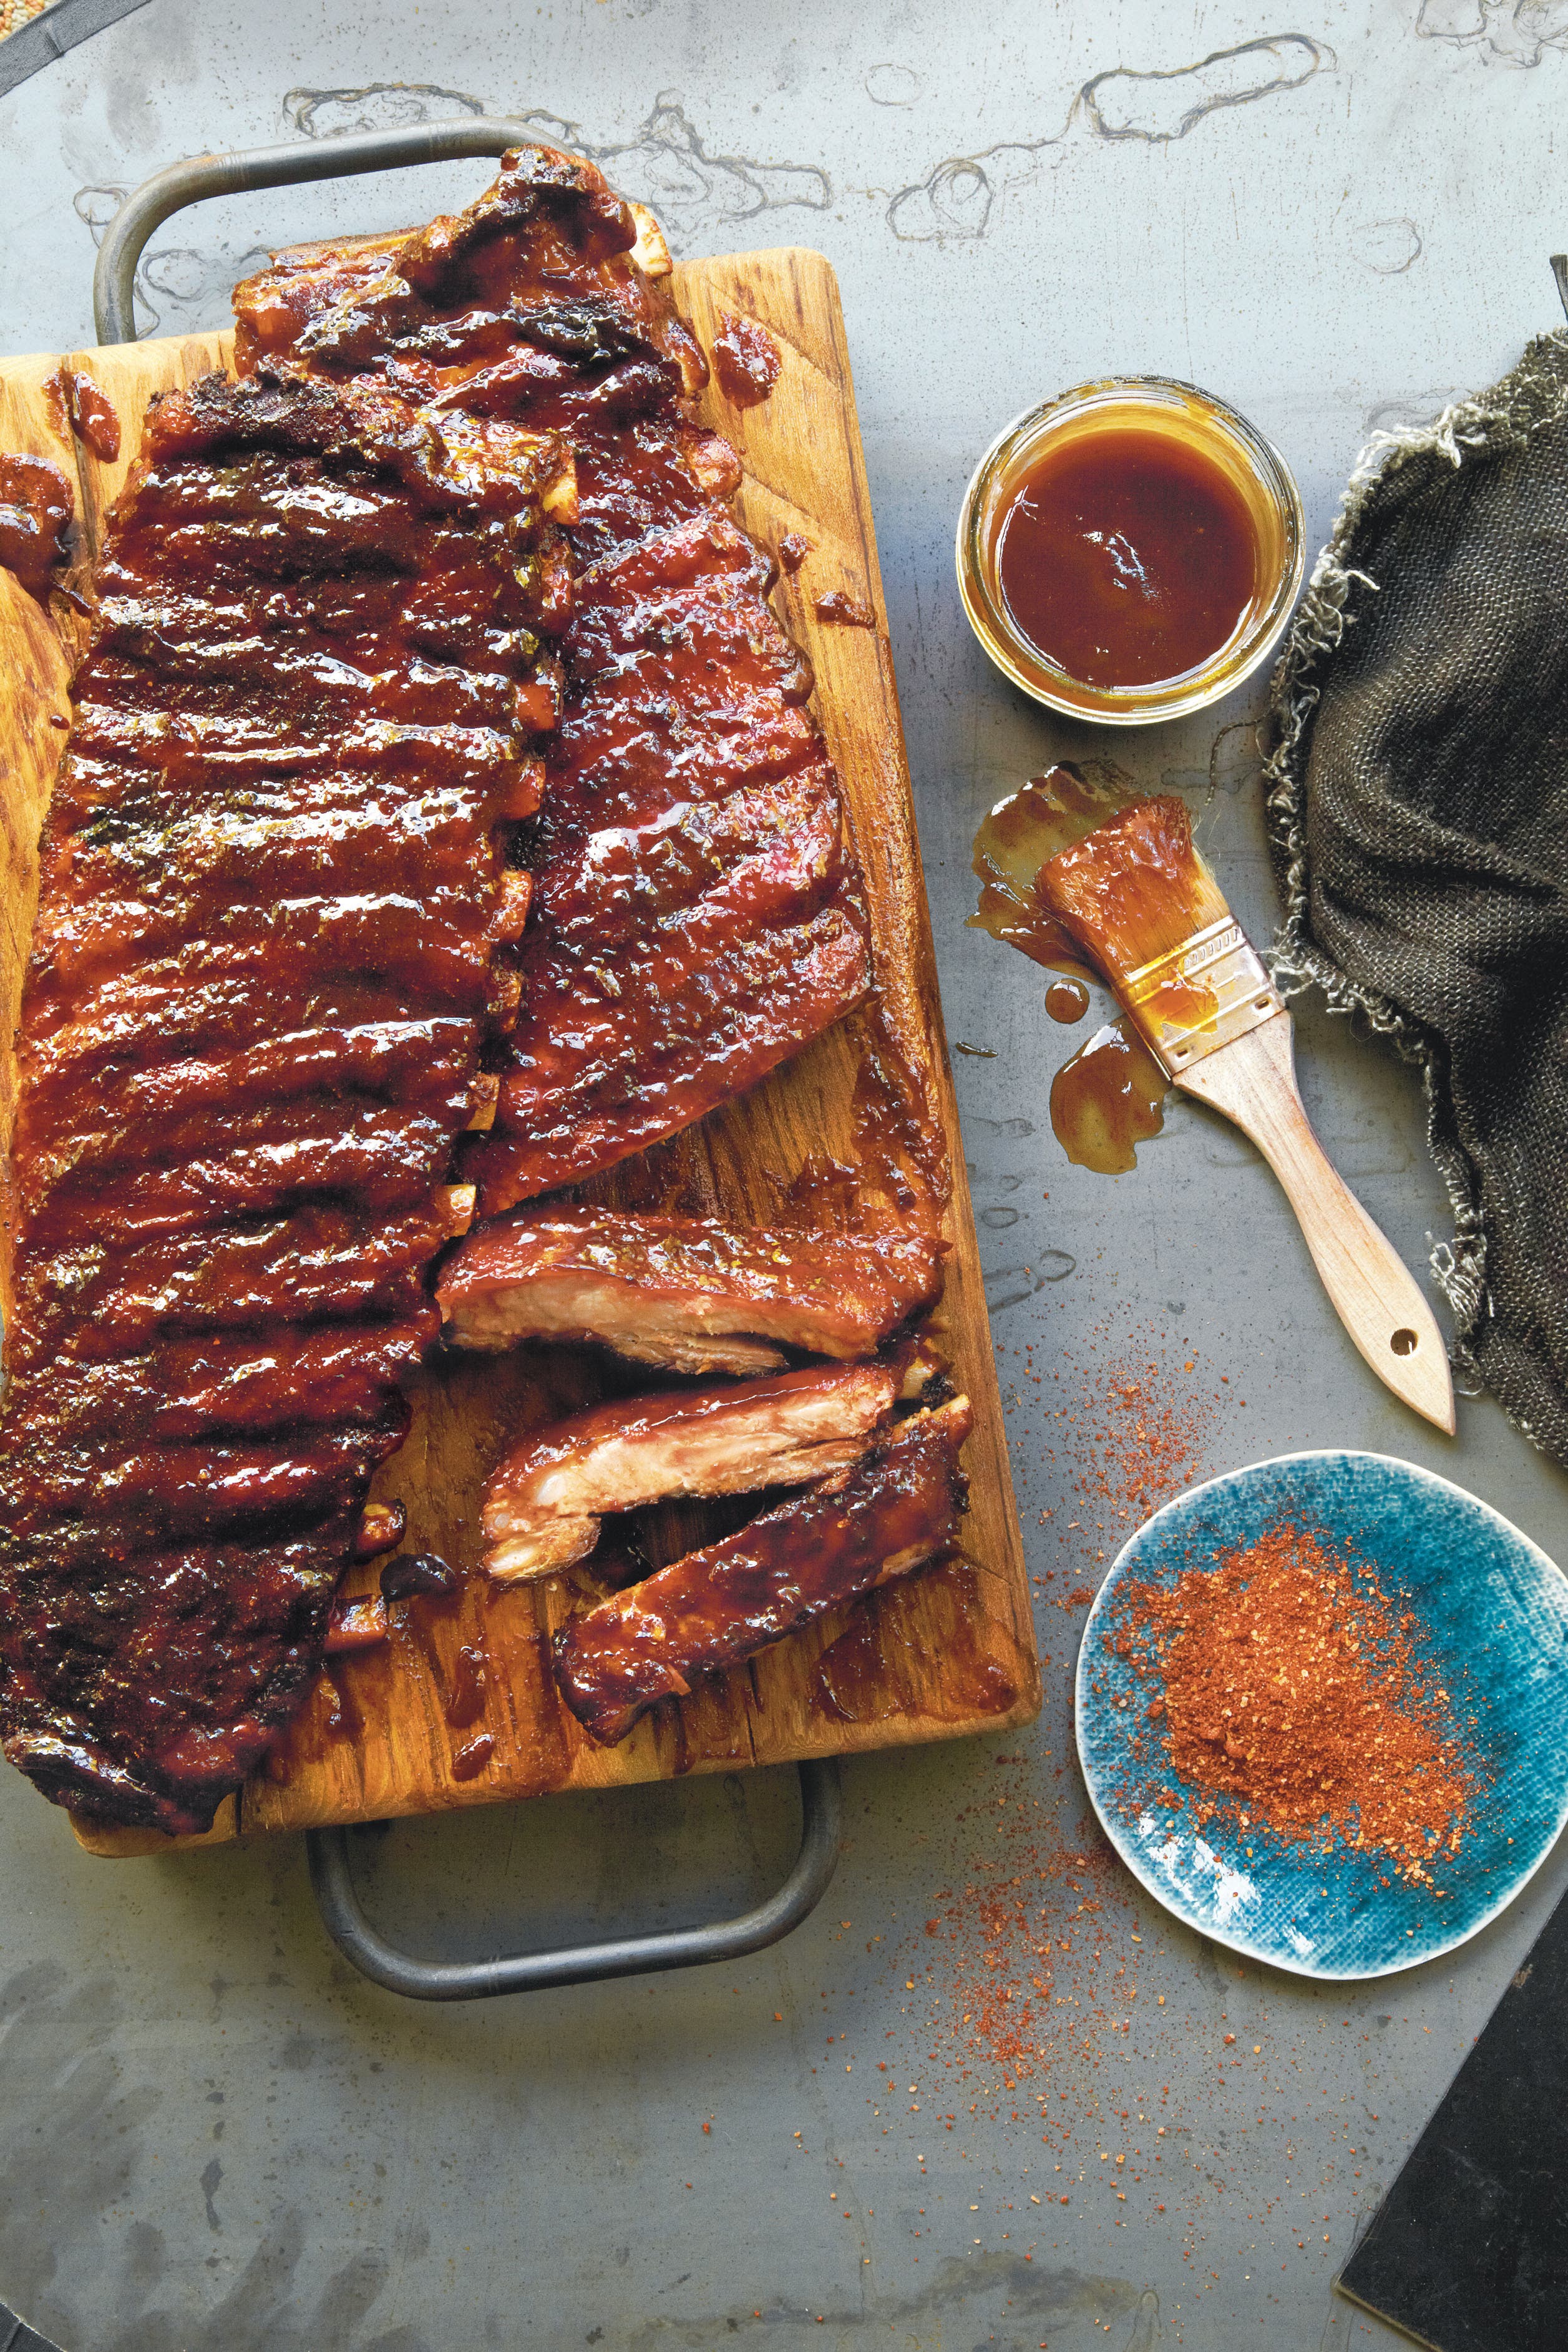 Fox & Food: Best Hot, Smokey Ribs and Other Cookout Tips ...
